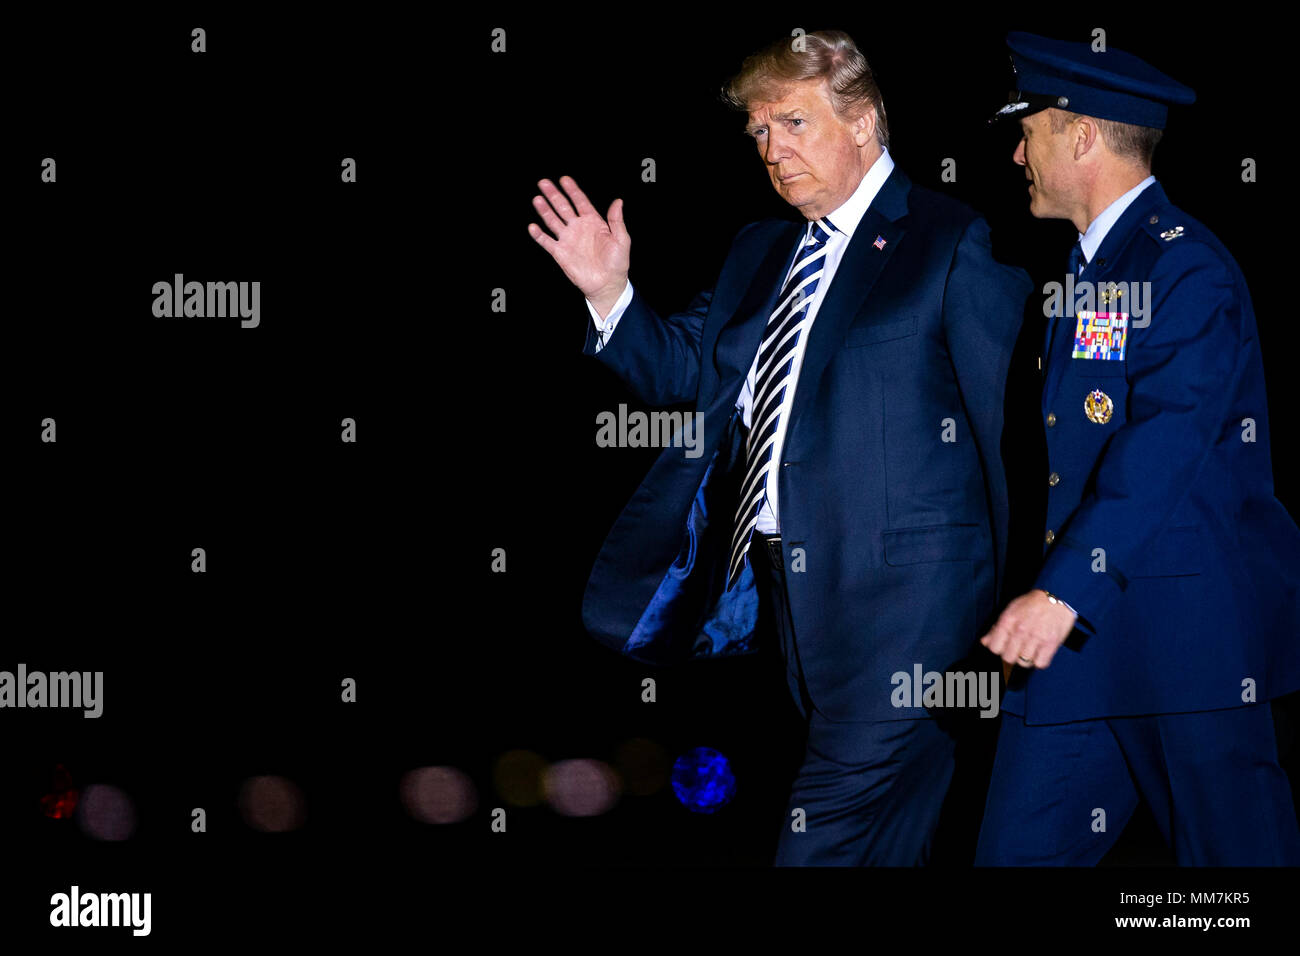 U.S. President Donald Trump walks with Air Force Col. Casey Eaton, Commander, 89th Airlift Wing, before greeting American detainees before their arrival from North Korea at Joint Base Andrews, Maryland, U.S., on Thursday, May 10, 2018. North Korea released the three U.S. citizens who had been detained for as long as two years, a goodwill gesture ahead of a planned summit between President Donald Trump and Kim Jong Un that's expected in the coming weeks. Credit: Al Drago/Pool via CNP /MediaPunch Stock Photo